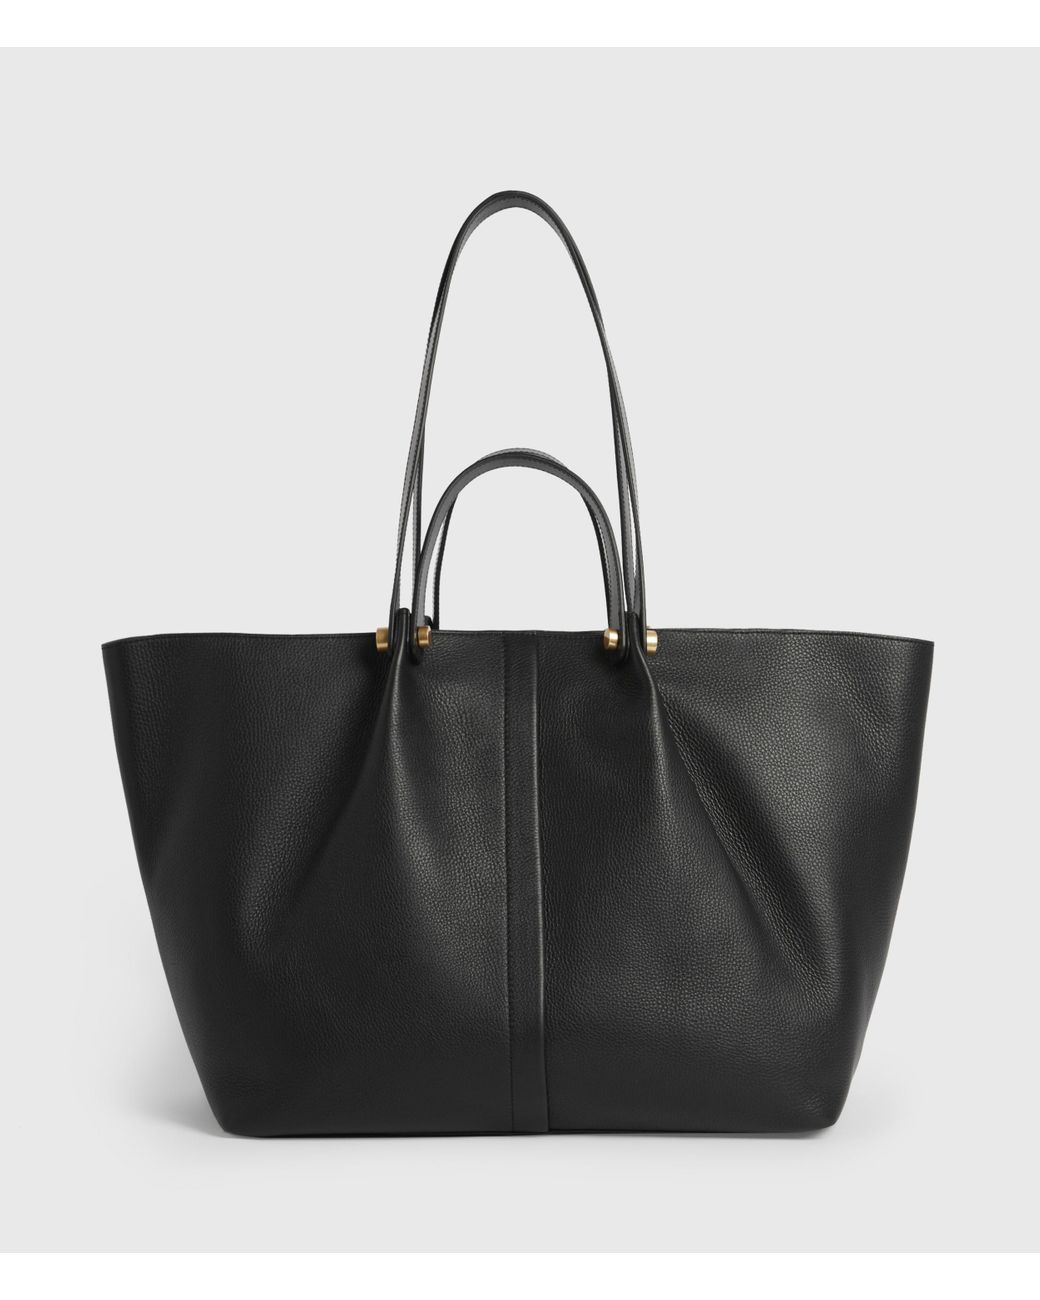 AllSaints Allington Extra Large Leather Tote in Black | Lyst